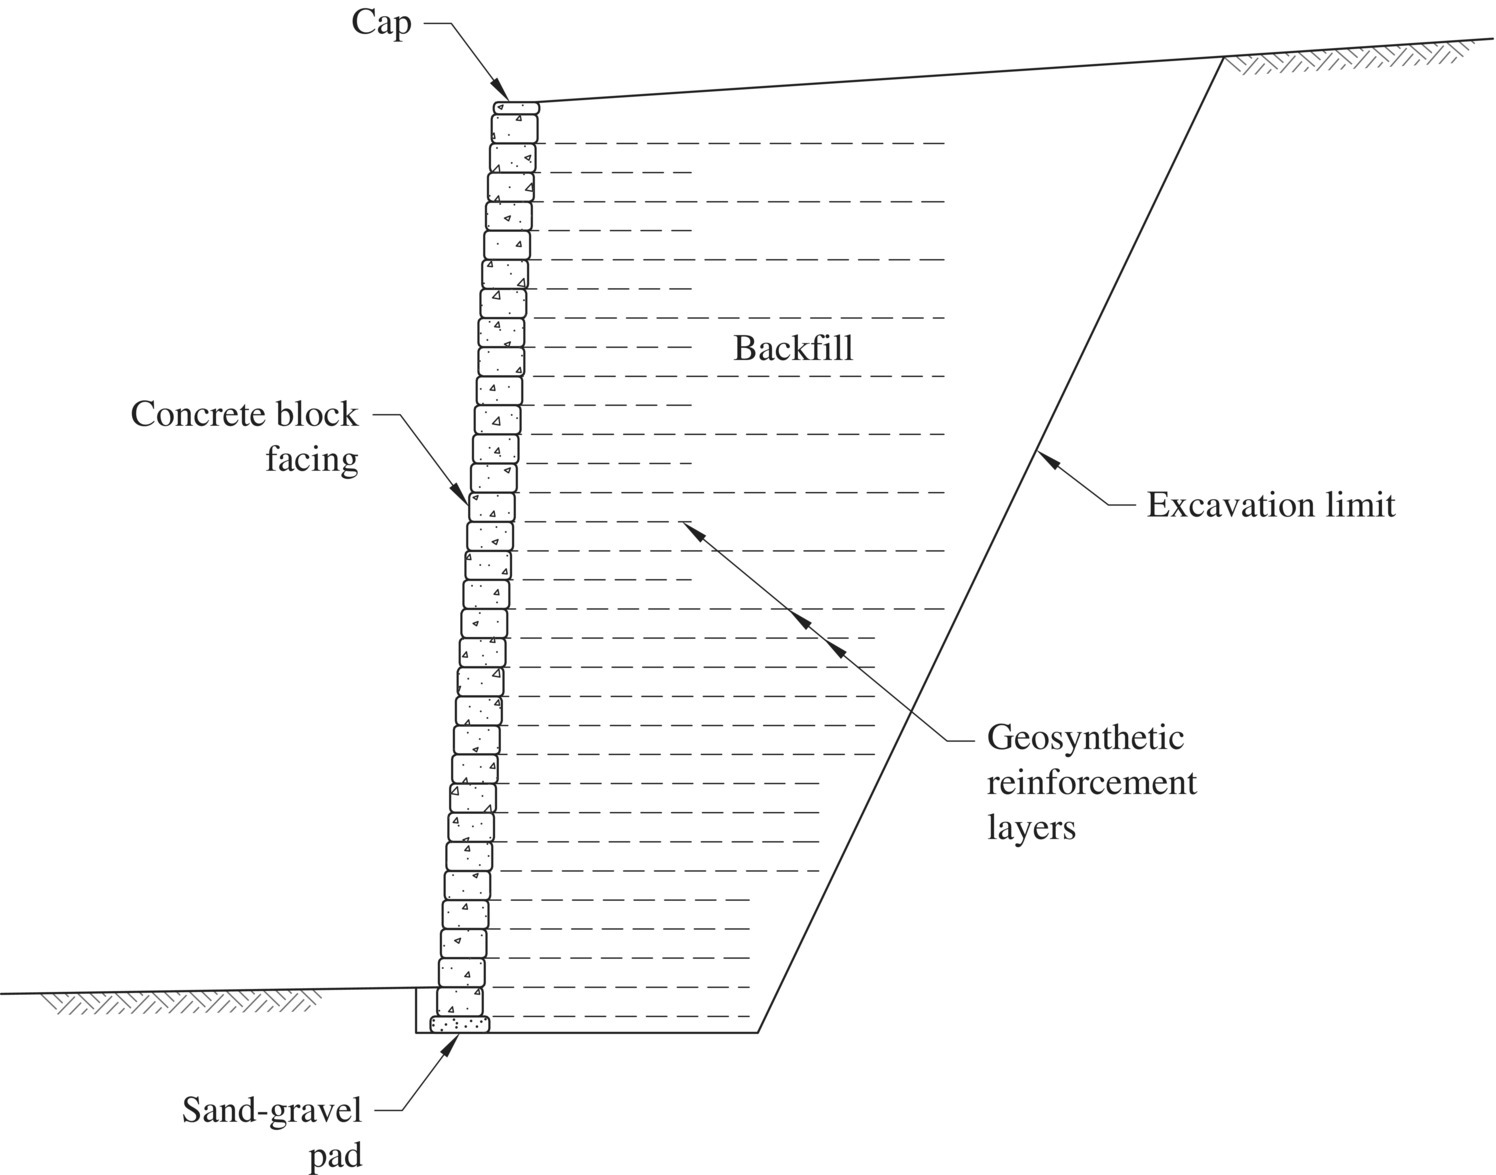 Typical cross section of a concrete block GRS wall with alternating tails in the upper portion and a truncated base in the lower portion, with arrows marking the sand-gravel pad, cap, excavation limit, etc.